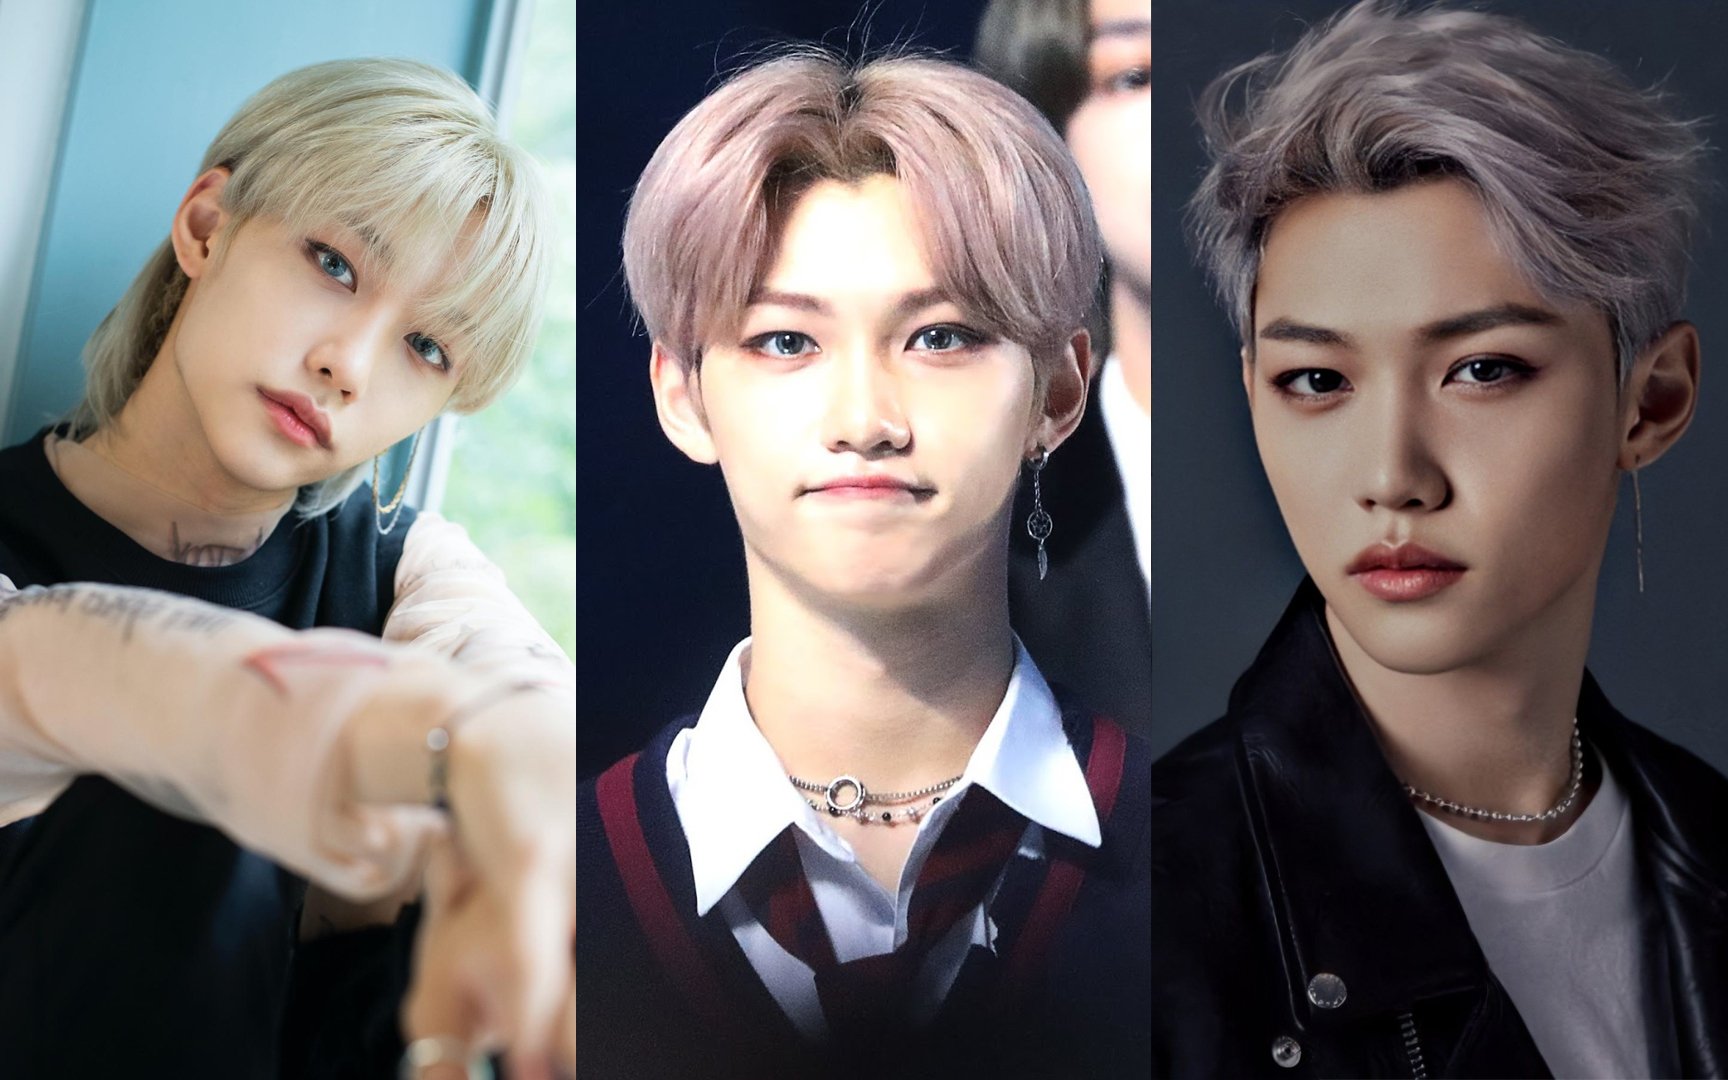 Fans say Stray Kids' Felix looks good in any hairstyle | allkpop